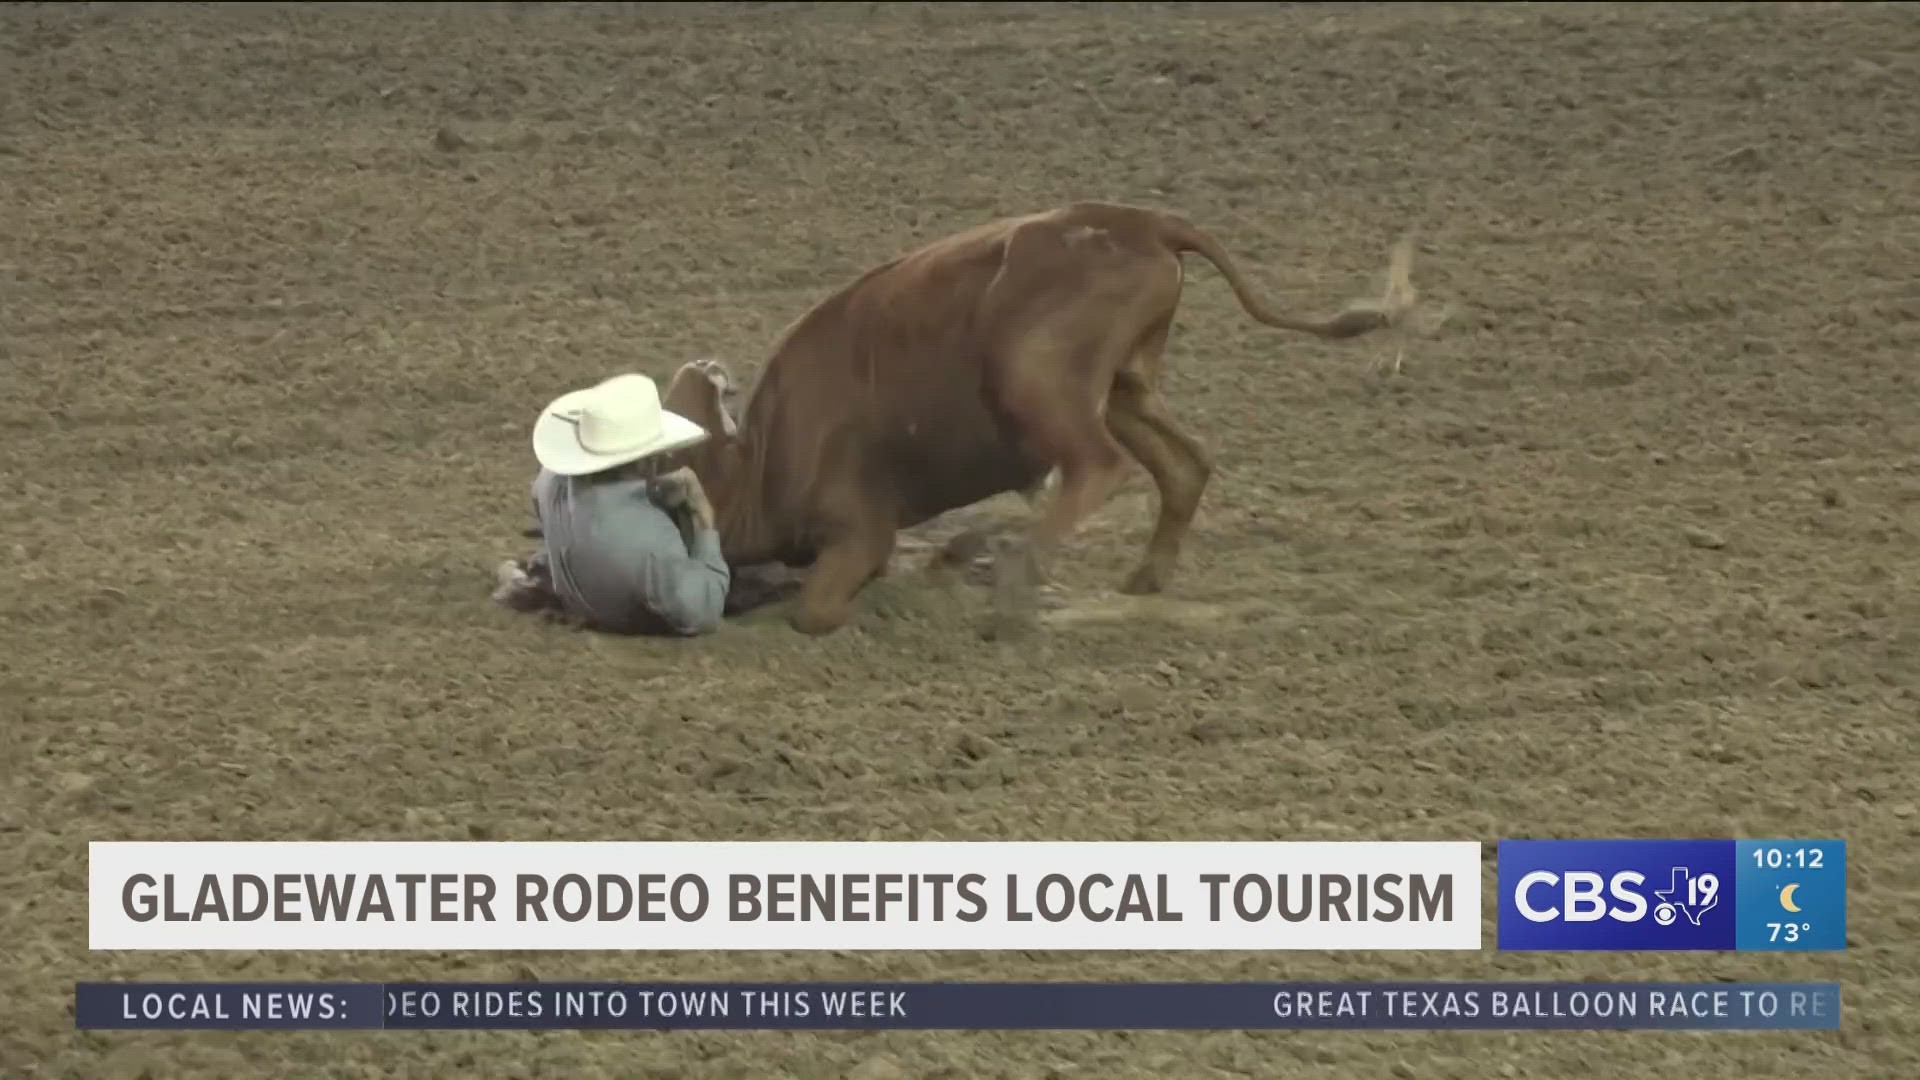 "Our rodeo is one of the most respected activities," said executive director of the Gladewater Chamber of Commerce Lois Reed.